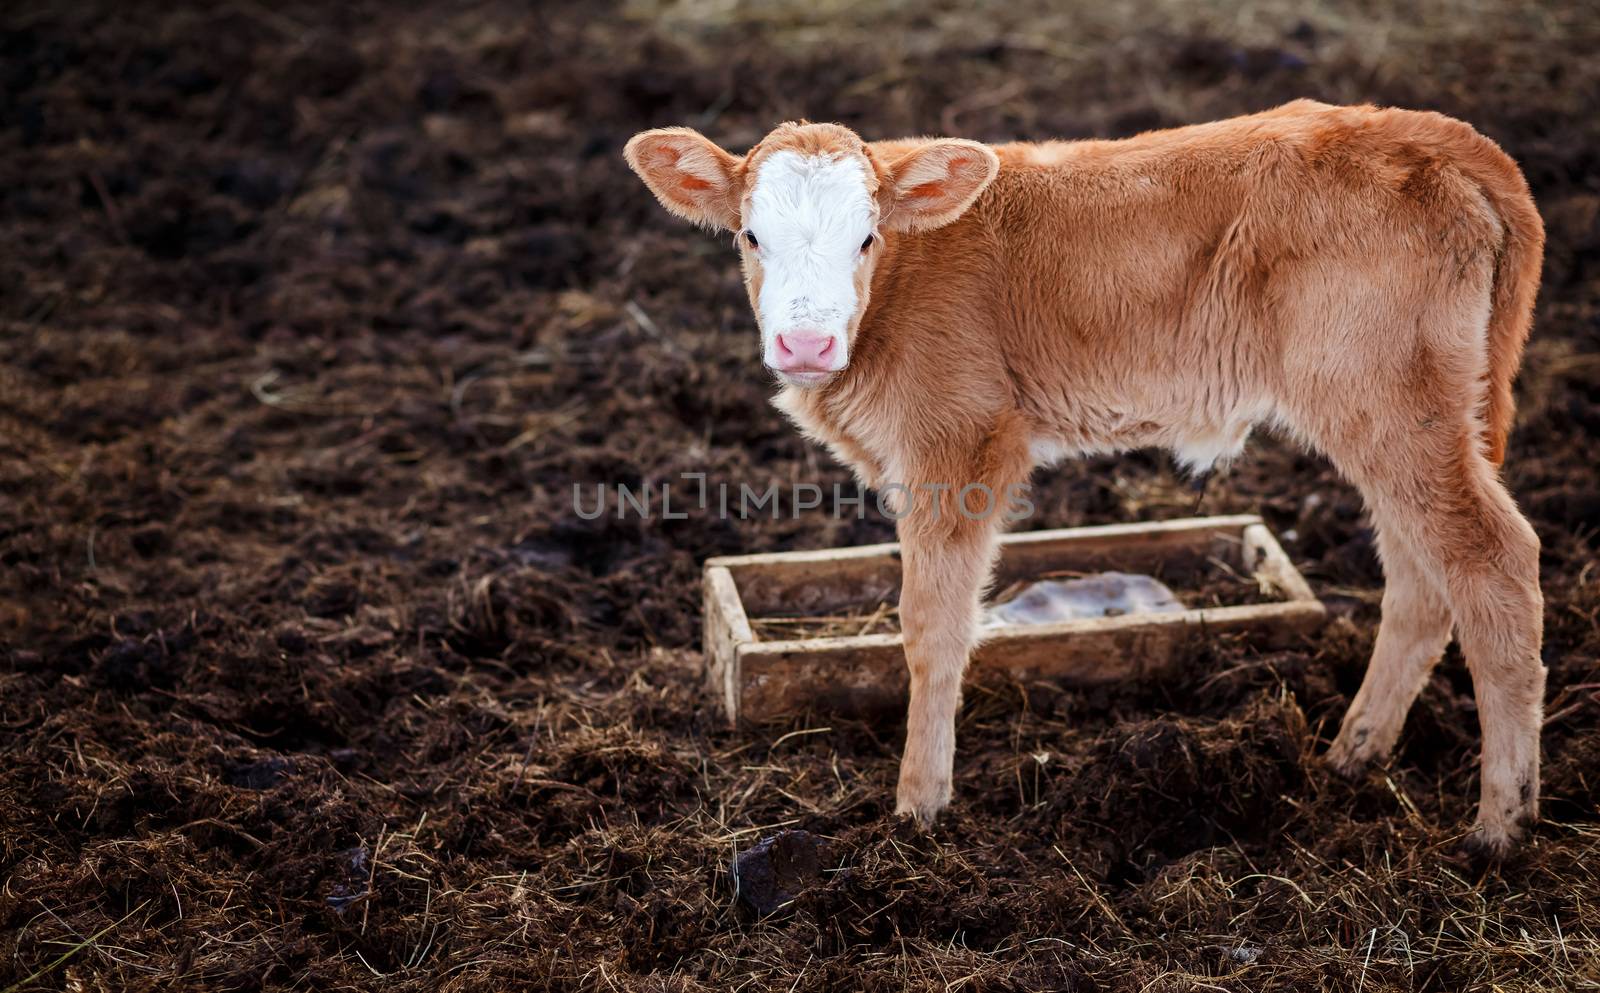 Calf in middle of feedlot manure, next to tub for water. by Maynagashev